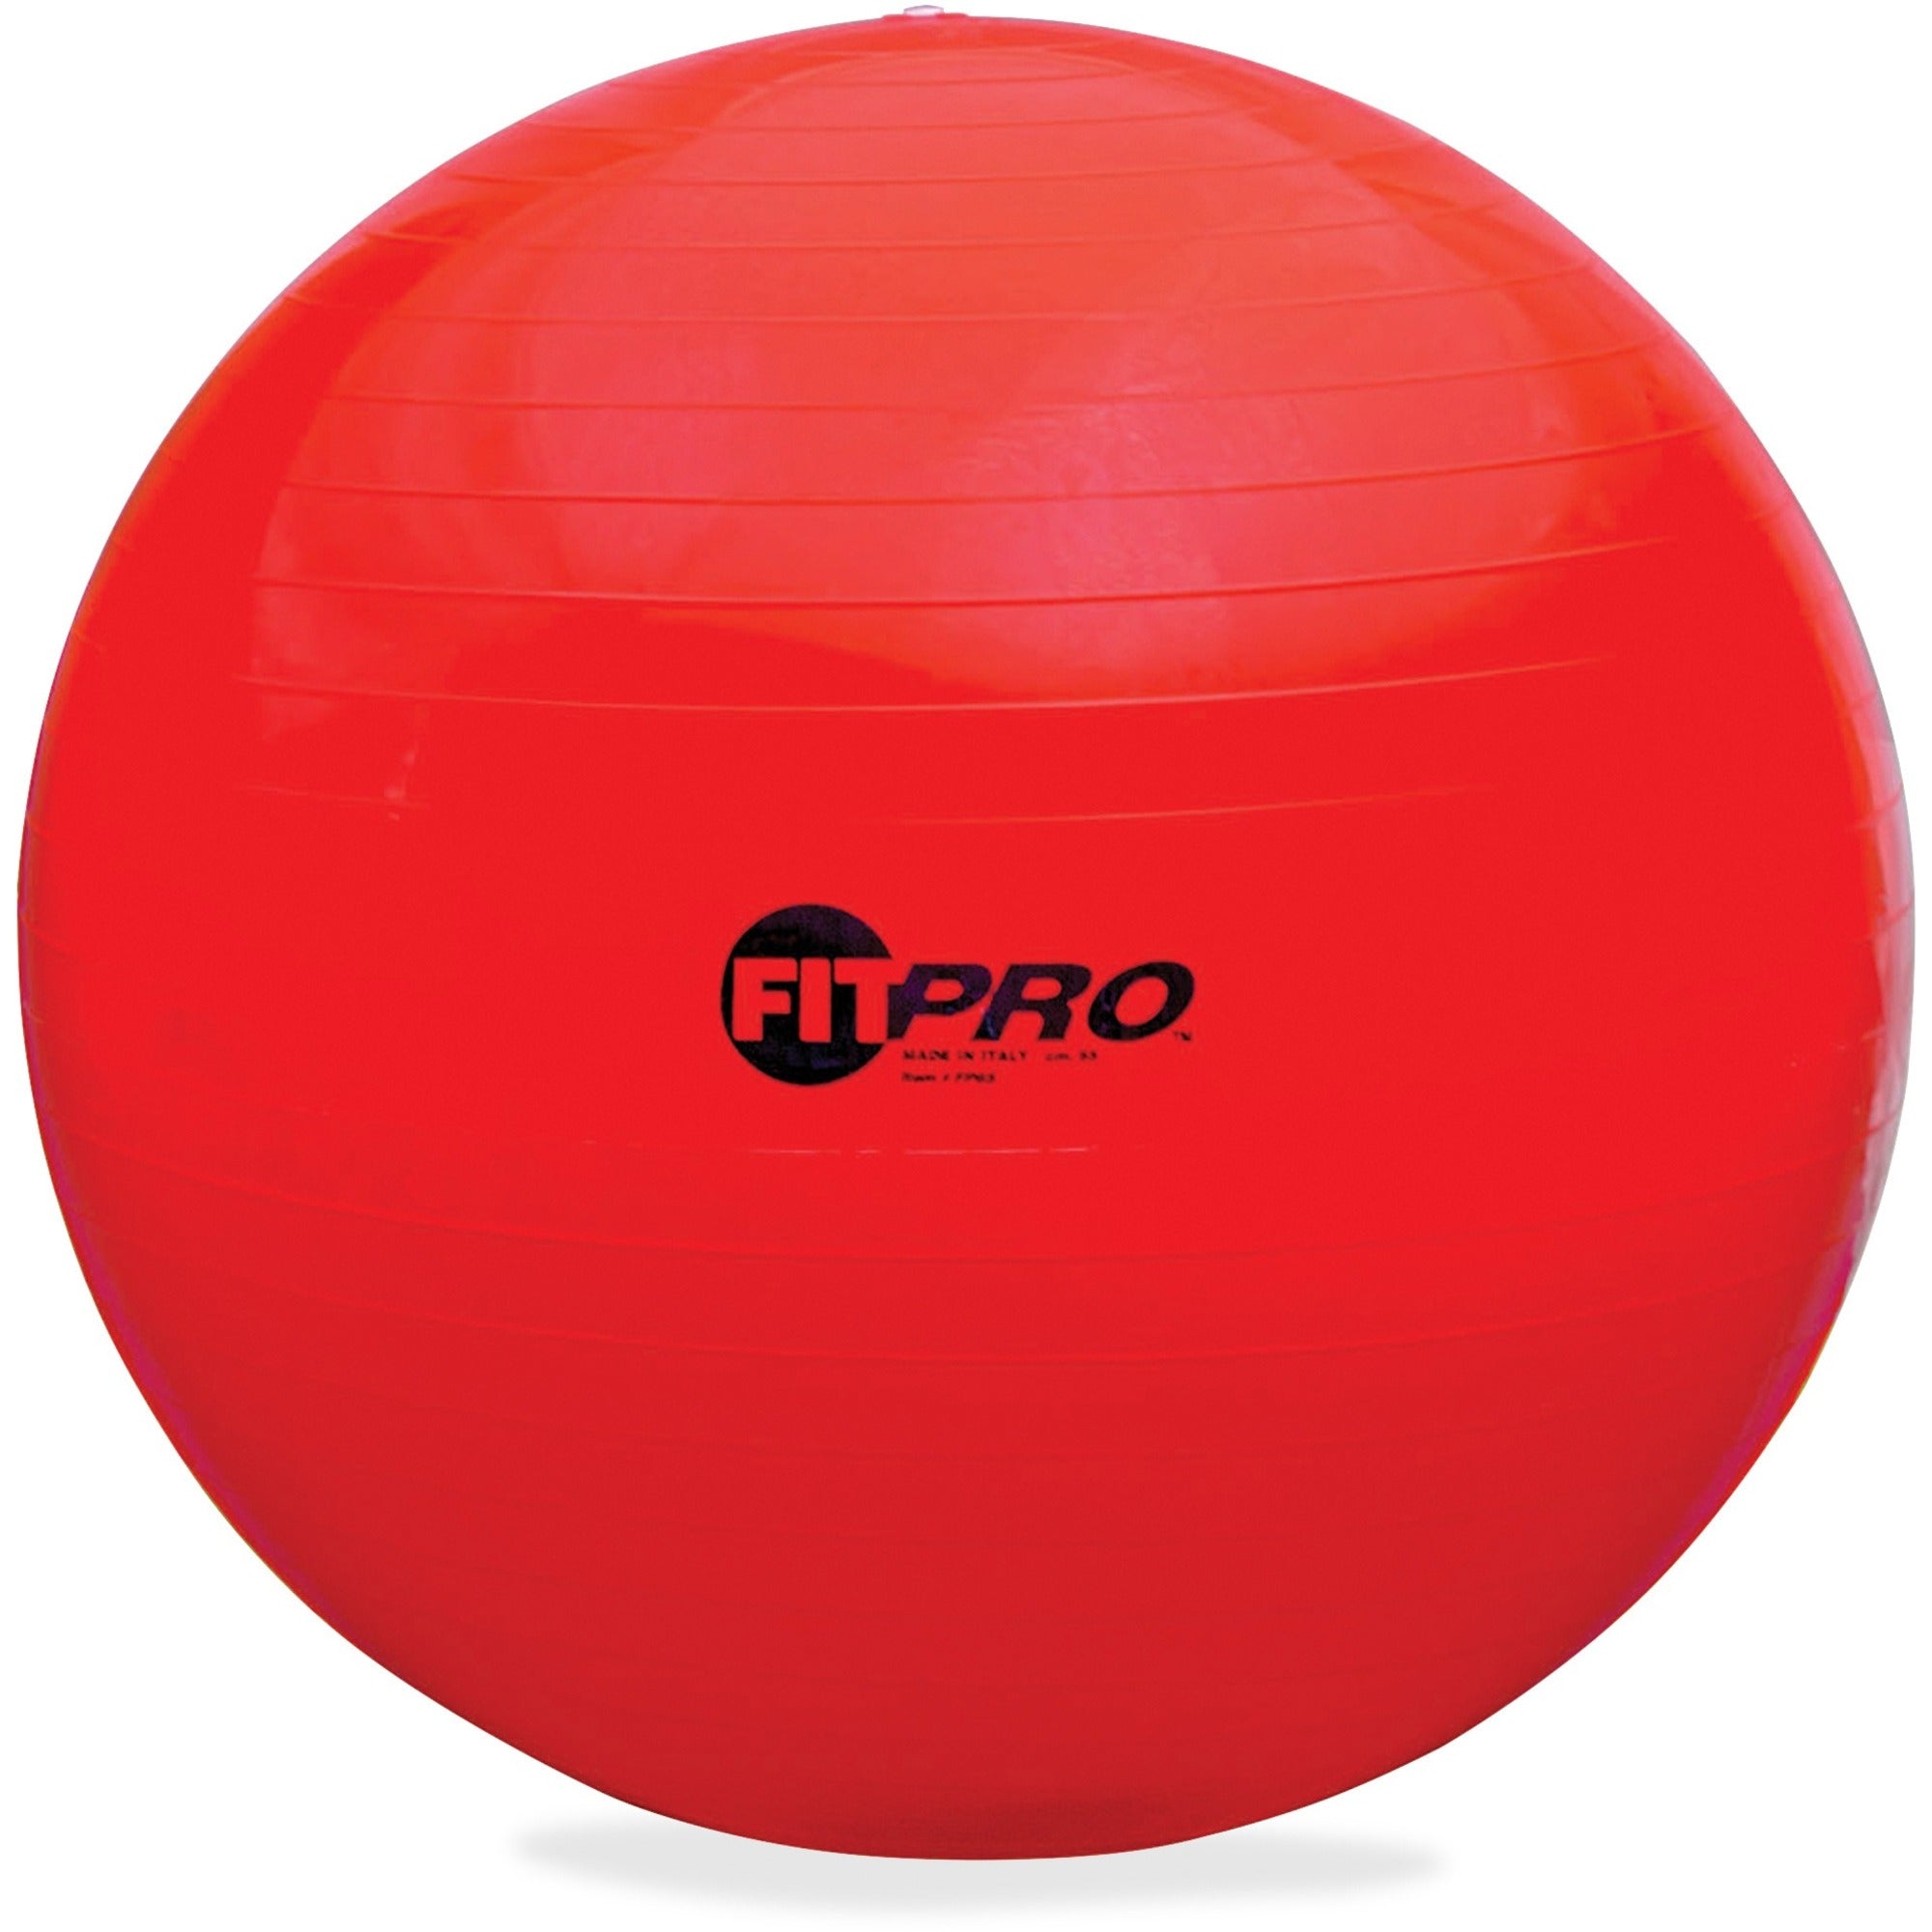 Champion Sports FitPro Training/Exercise Ball - Red - Resin - 